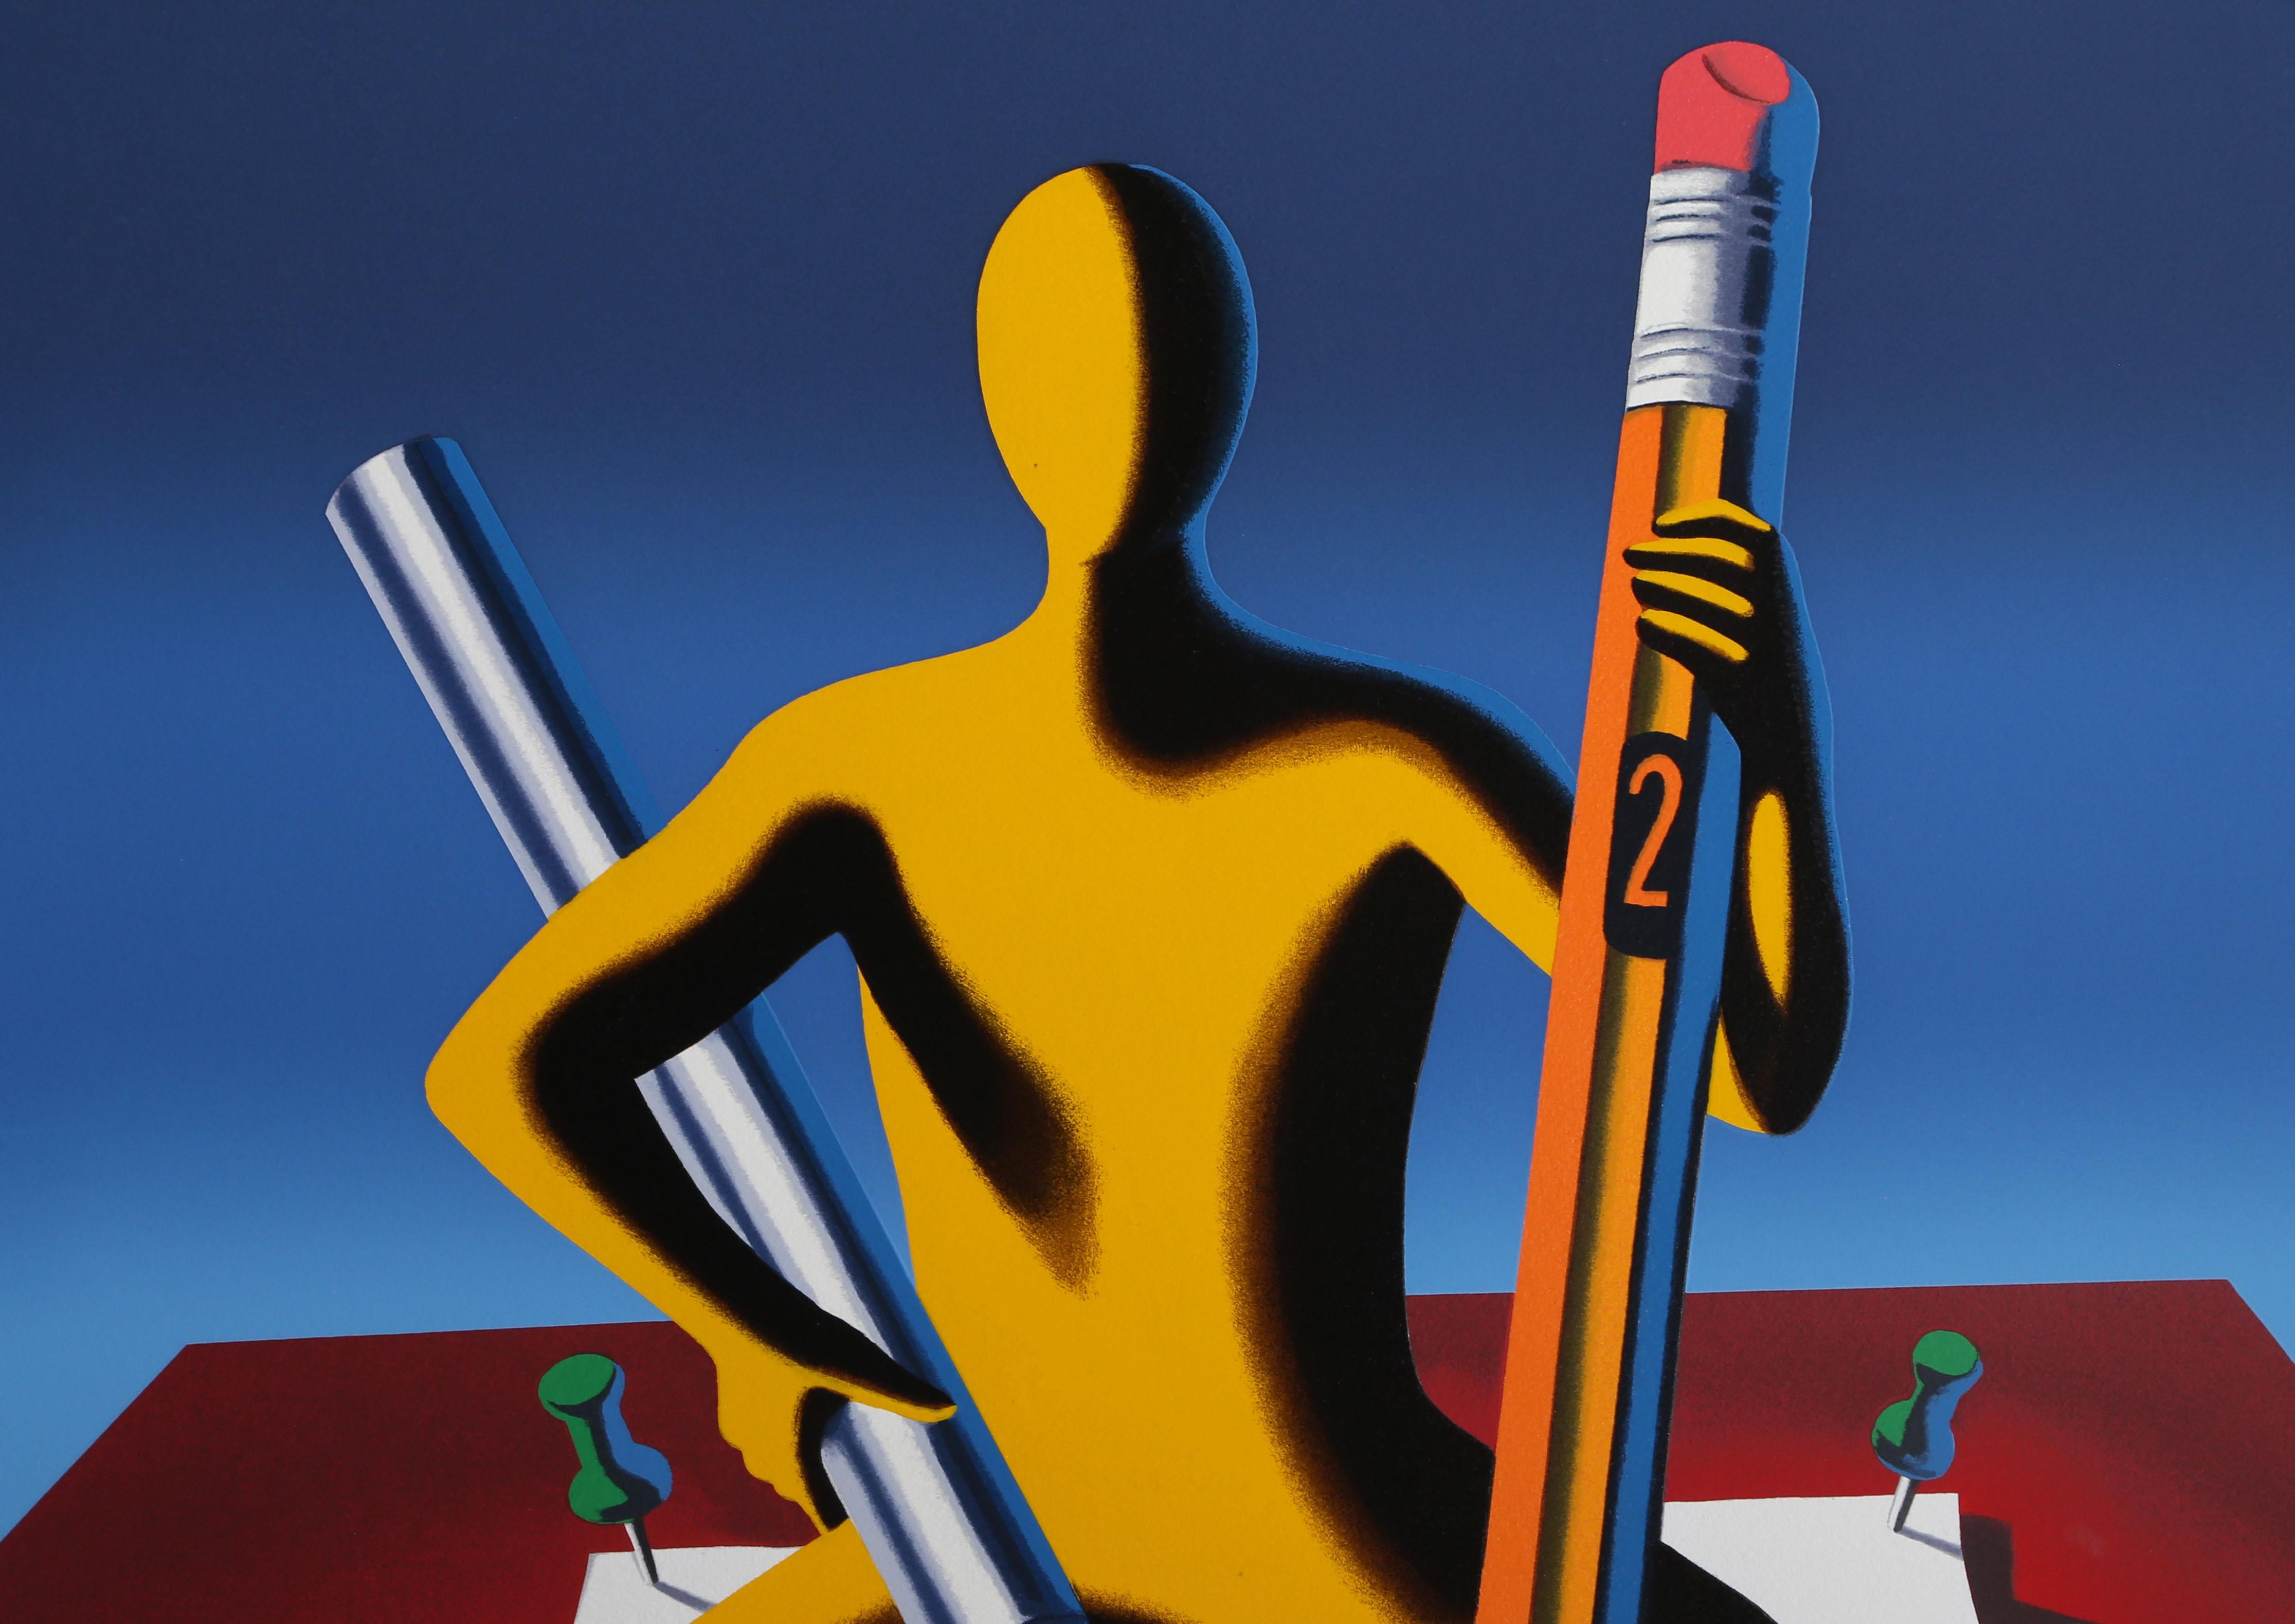 Careful With That Ax Eugene
Mark Kostabi, American (1960)
Date: 2001
Screenprint, signed and numbered in pencil
Edition of 100 (Roman Numerals)
Size: 35.5 x 27.5 inches